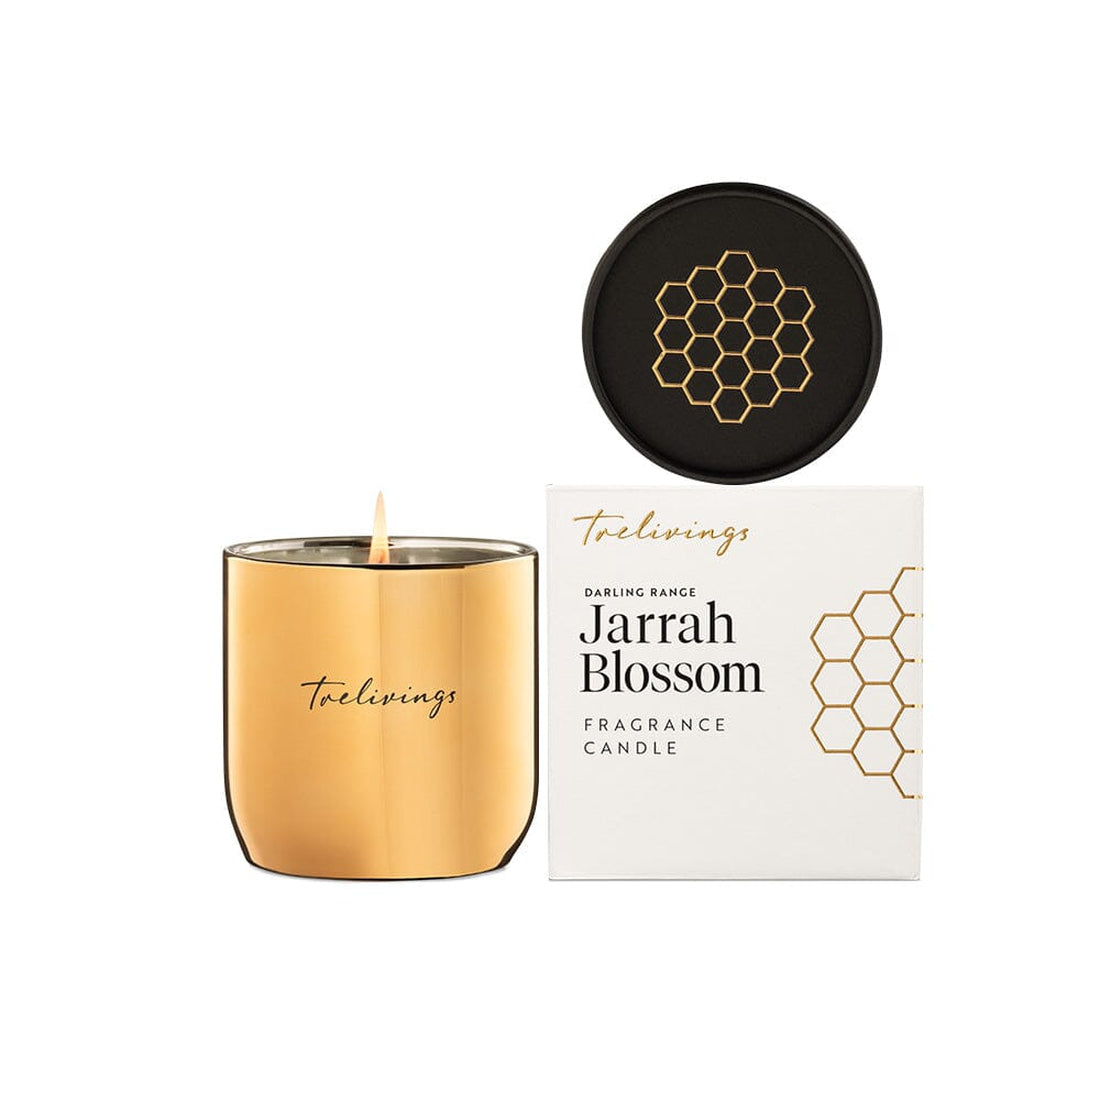 TRELIVINGS FRAGRANCE CANDLE 200G DARLING RANGE JARRAH BLOSSOM ACCESSORIES Brief Affairs 